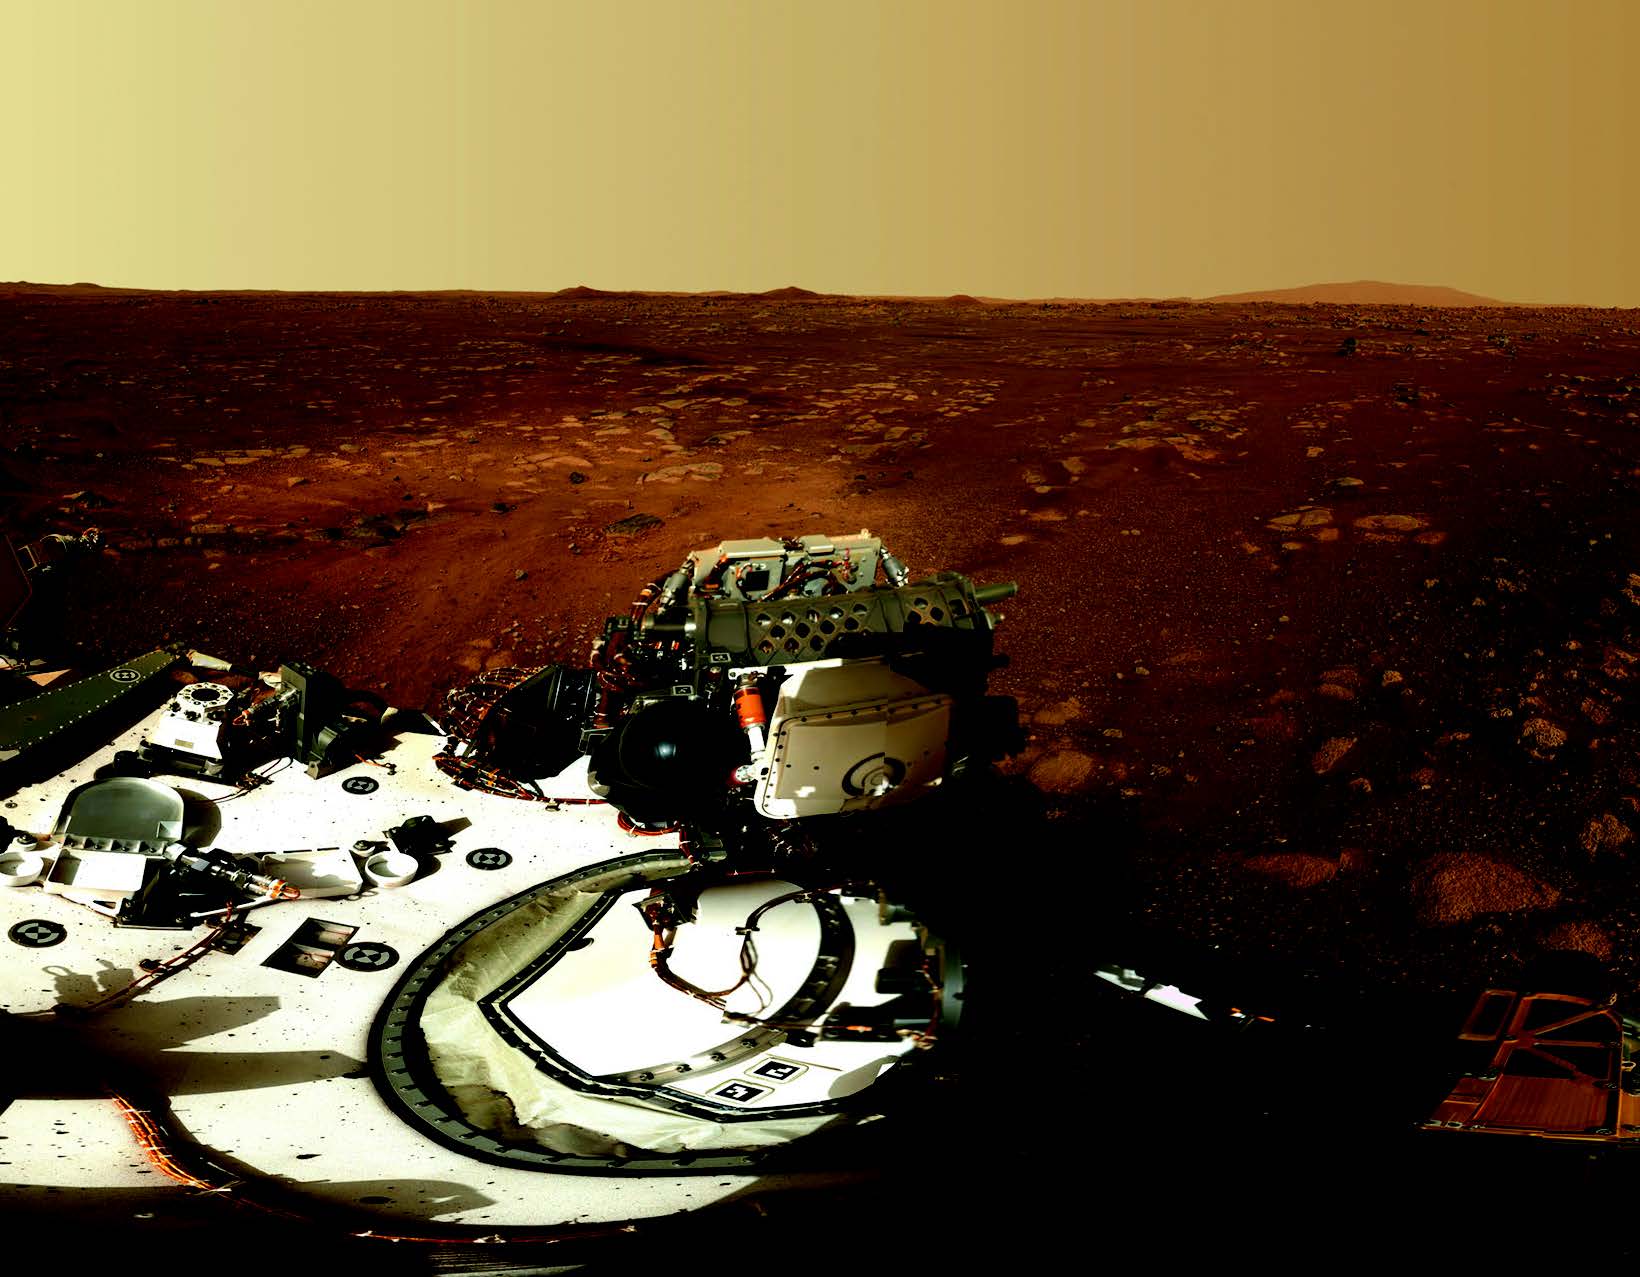 Image of Perseverance rover from Mars